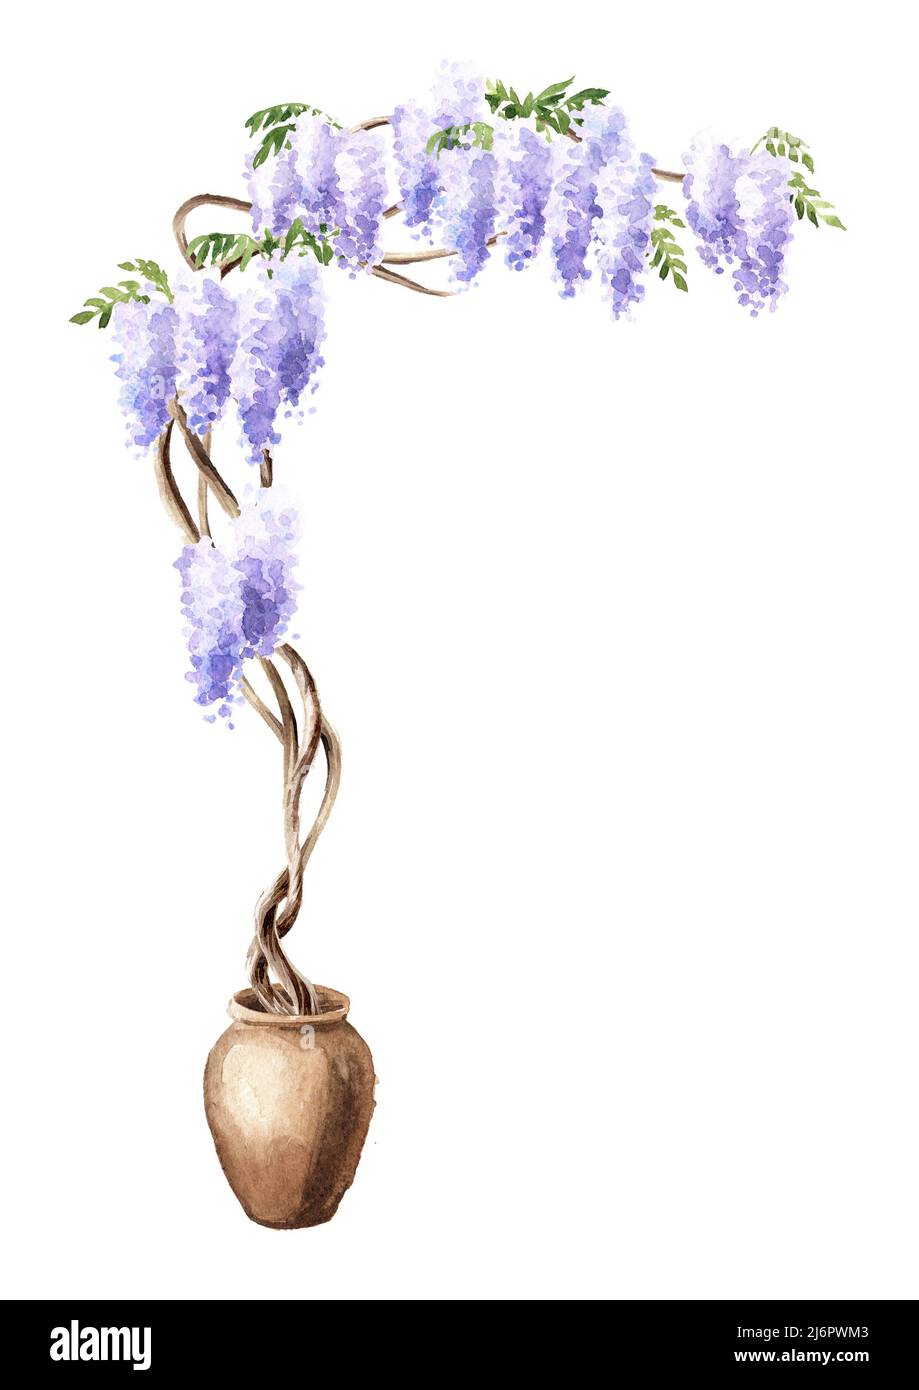 Wisteria  blossom  tree.  Hand  drawn watercolor  illustration isolated on white background Stock Photo